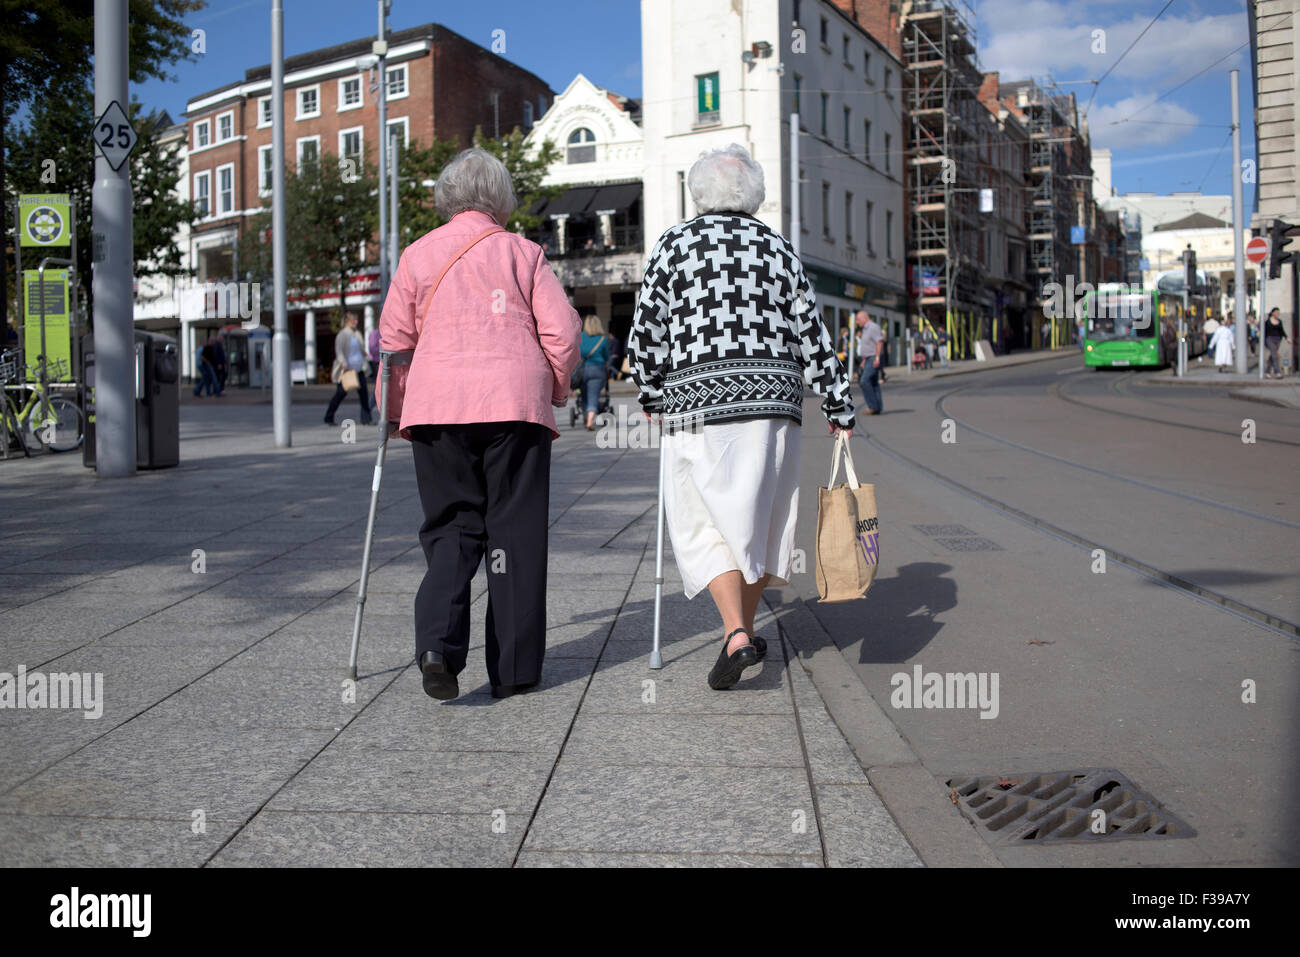 Disabled People Walking In City Centre Stock Photo - Alamy